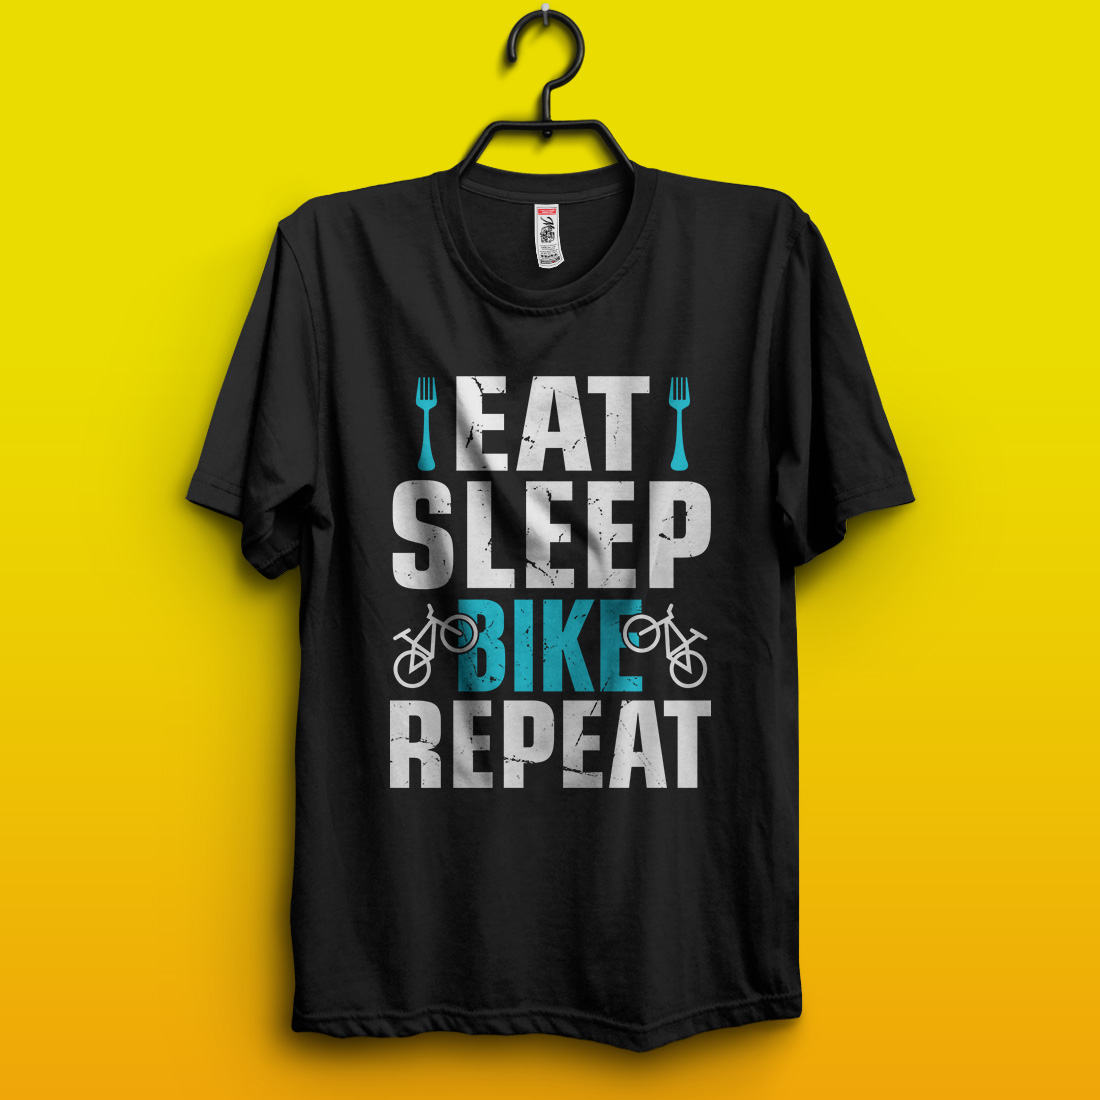 Eat sleep bike repeat – Cycling quotes t-shirt design for adventure lovers pinterest preview image.